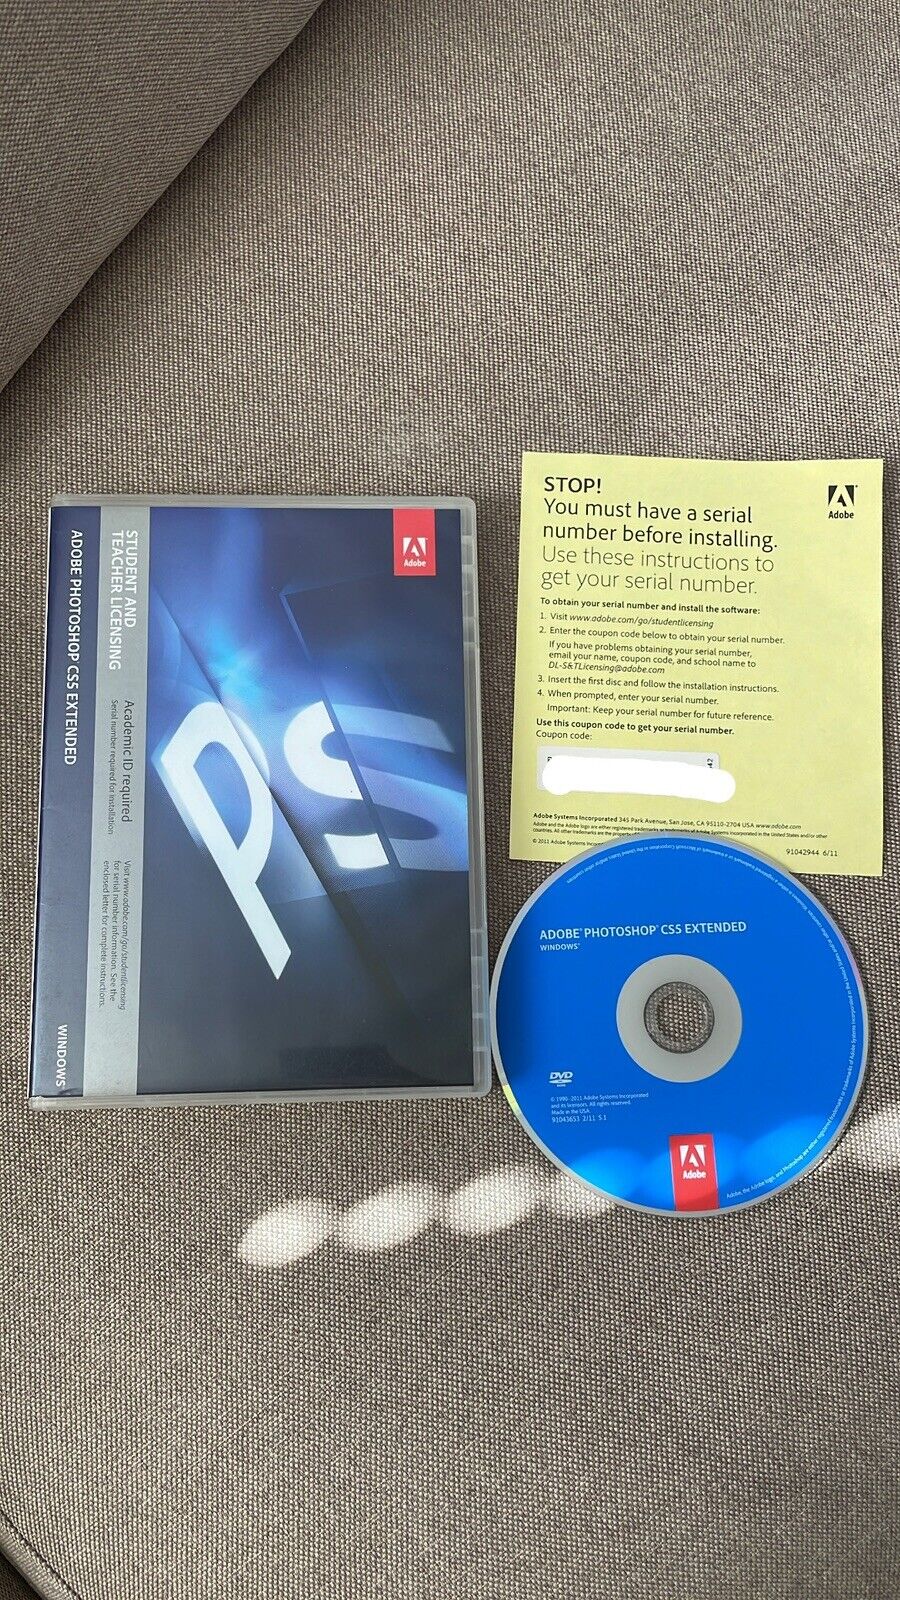 Adobe Photoshop CS5 Extended For WINDOWS w/ Serial Number